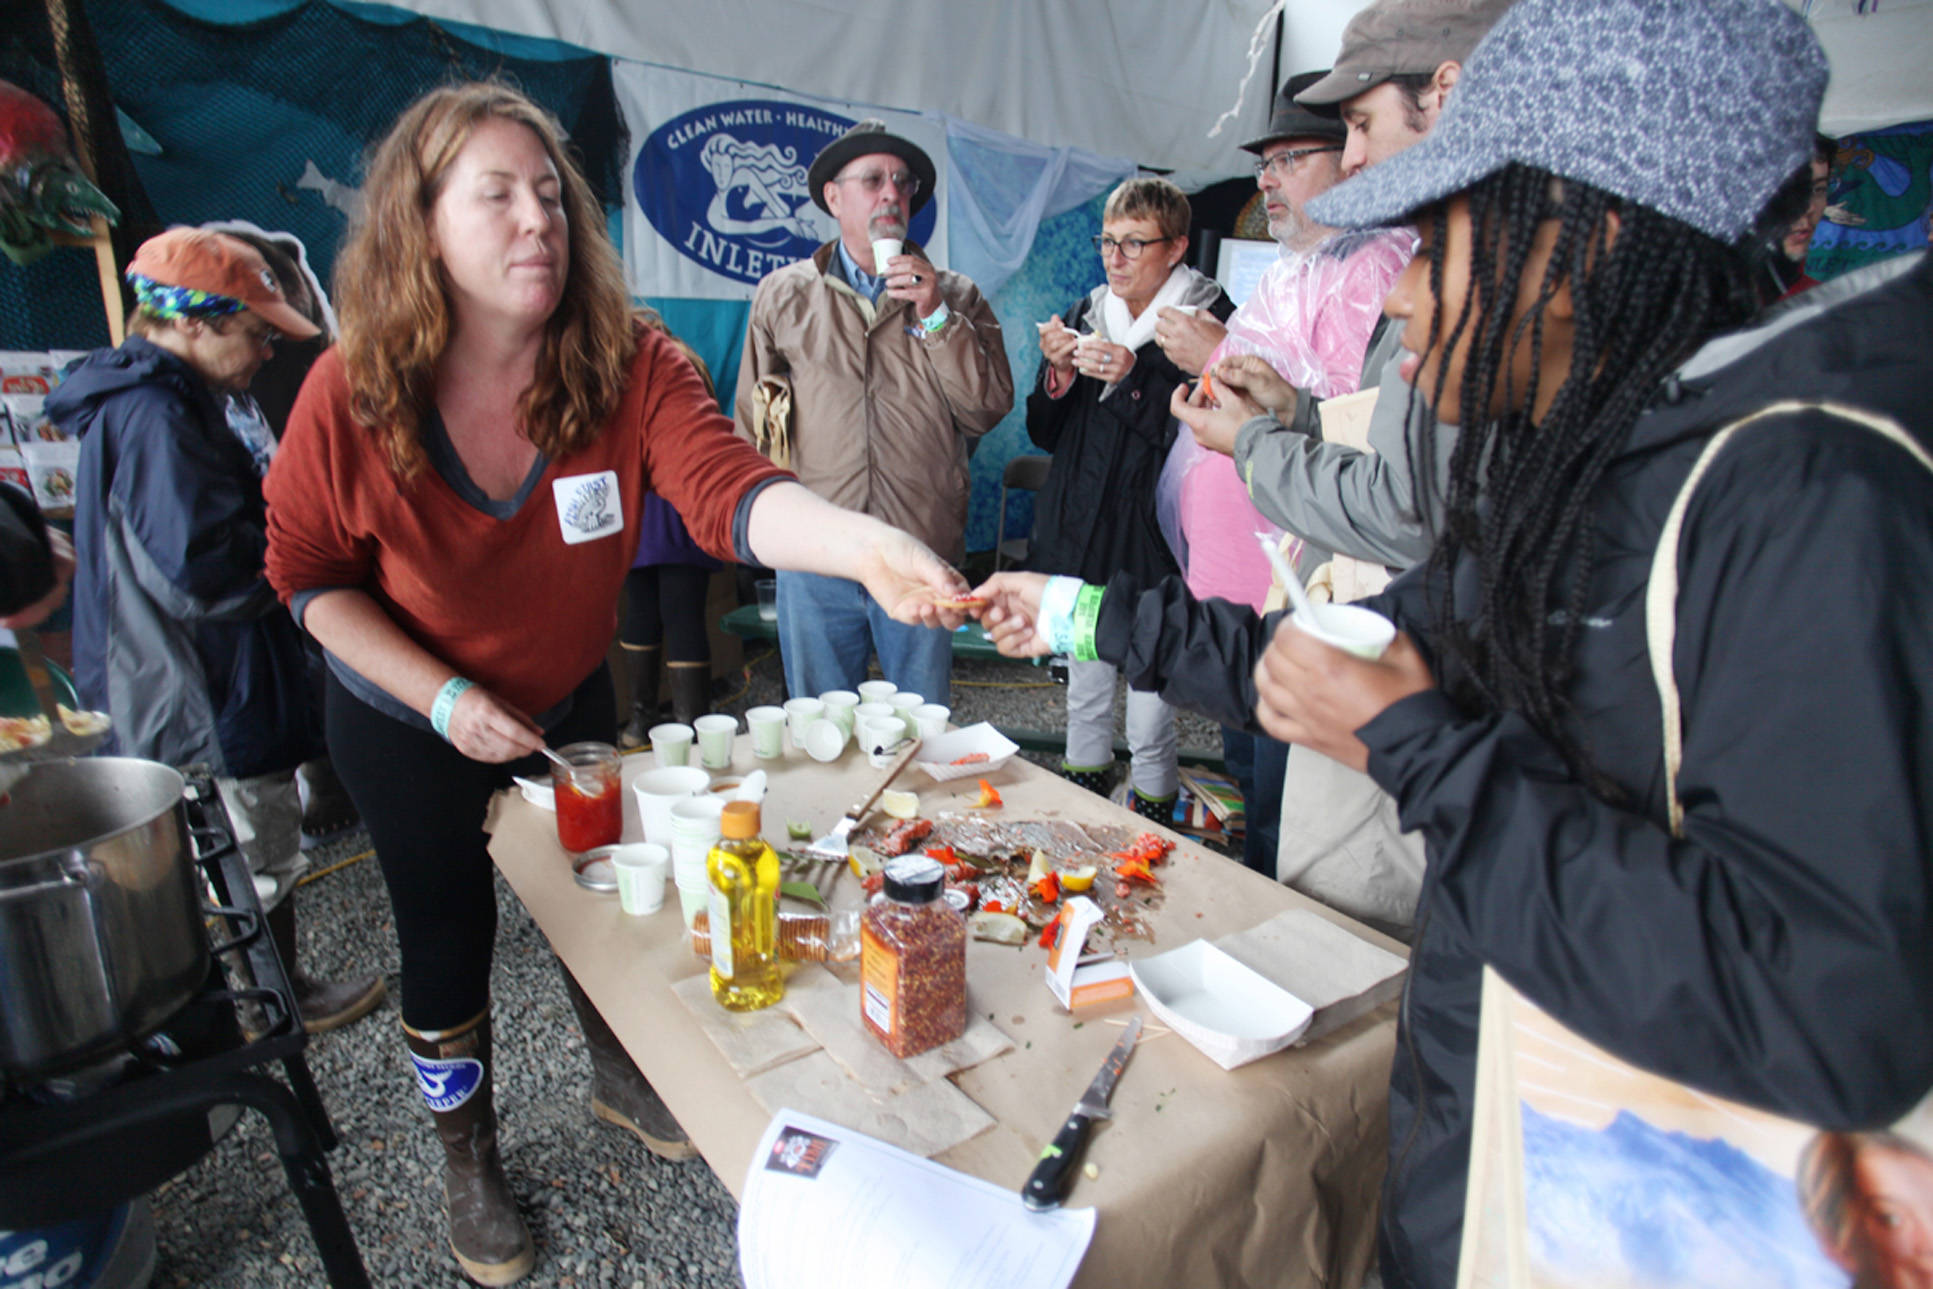 Christina Randall participates in a workshop presented by Maria Finn, author of “The Whole Fish, How Adventurous Eating of Seafood Will Make you Healthier, Sexier and Help Save the Ocean” on how to use every part of the salmon Aug. 7, 2016 at Salmonfest 2016 in Ninilchik, Alaska. Photo by Kelly Sullivan/ Peninsula Clarion